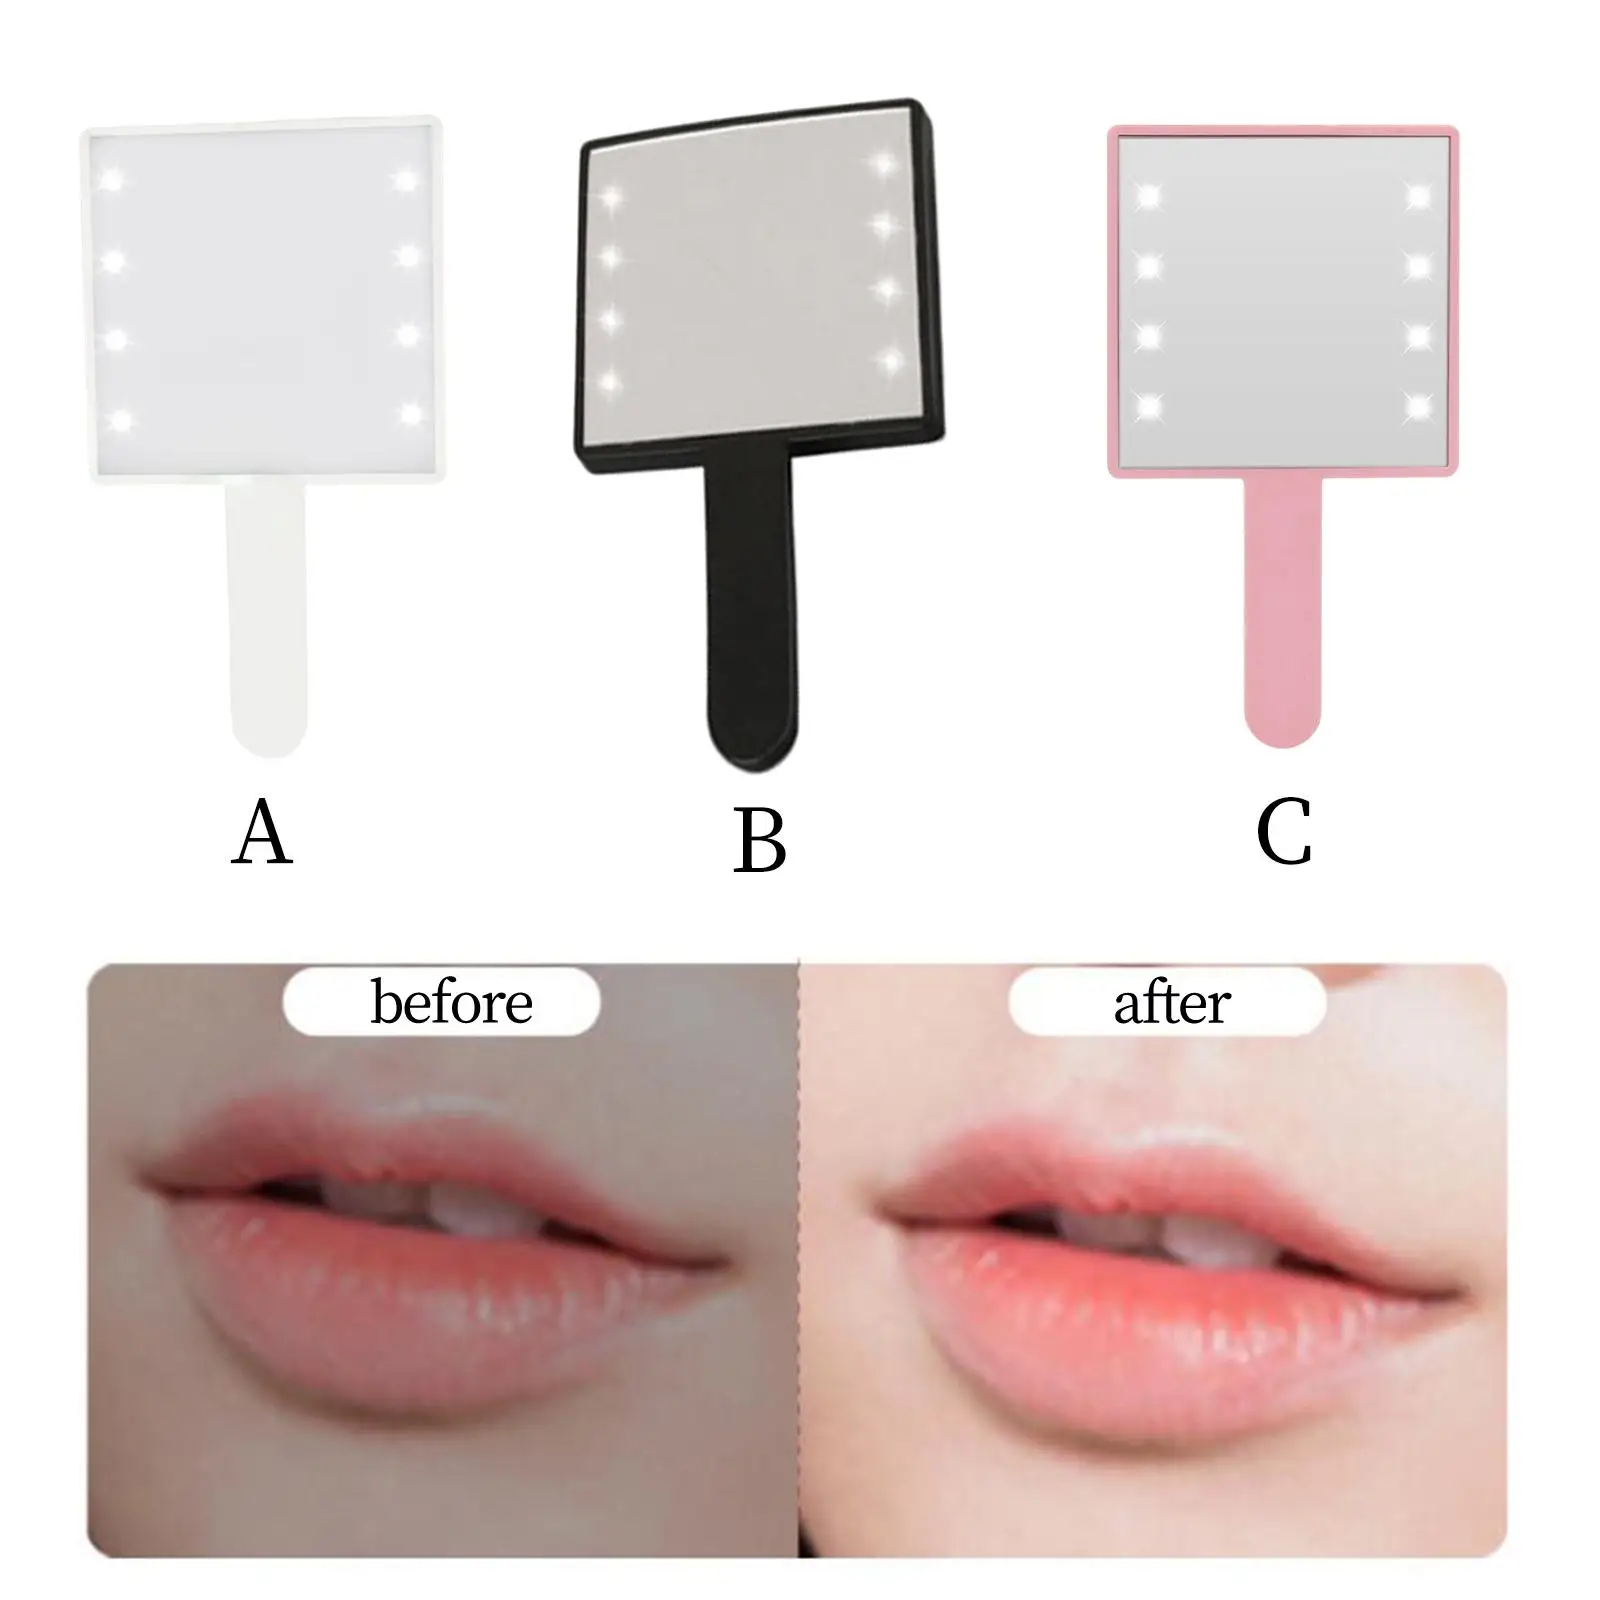 Makeup Mirror with LED Light, Gift for Woman, Vanity Mirror, Handheld Travel Makeup Mirror, Square Compact Portable, for Home